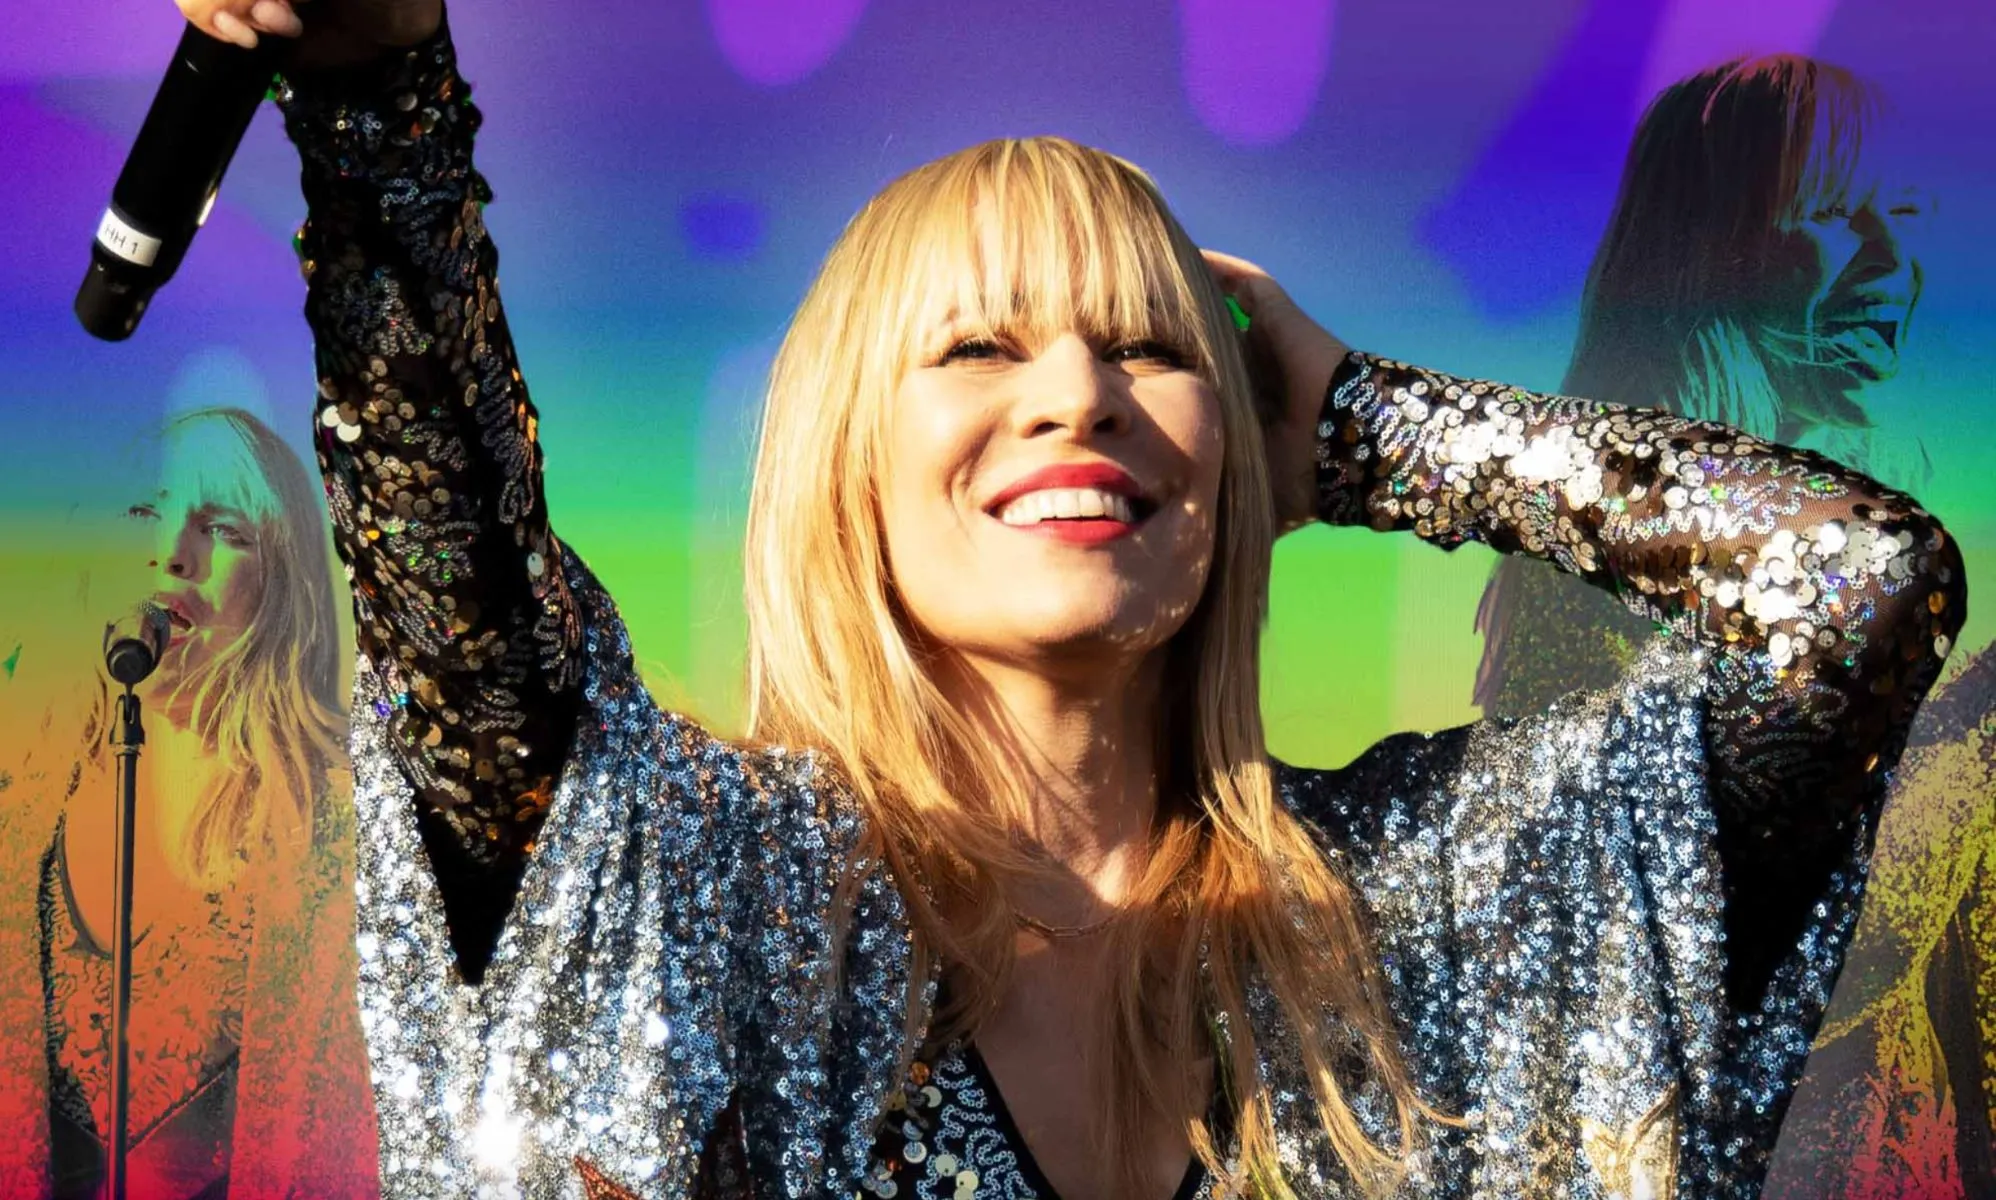 Natasha Bedingfield on how queer people changed her life